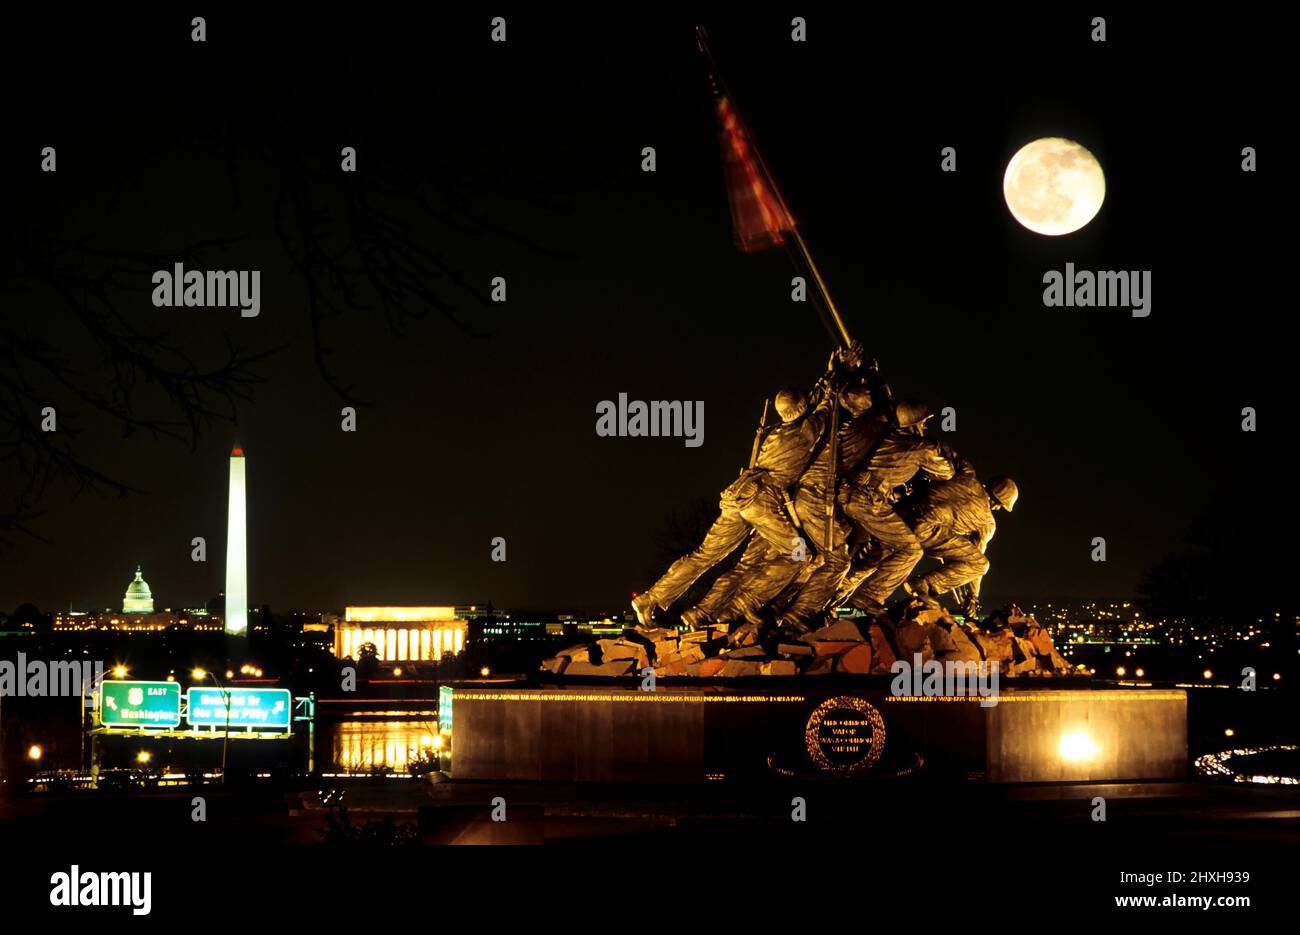 Washington DC Skyline at night under a full moon, featuring US Capitol Building, Lincoln Memorial and The Washington Monument - Washington DC, USA. Stock Photo